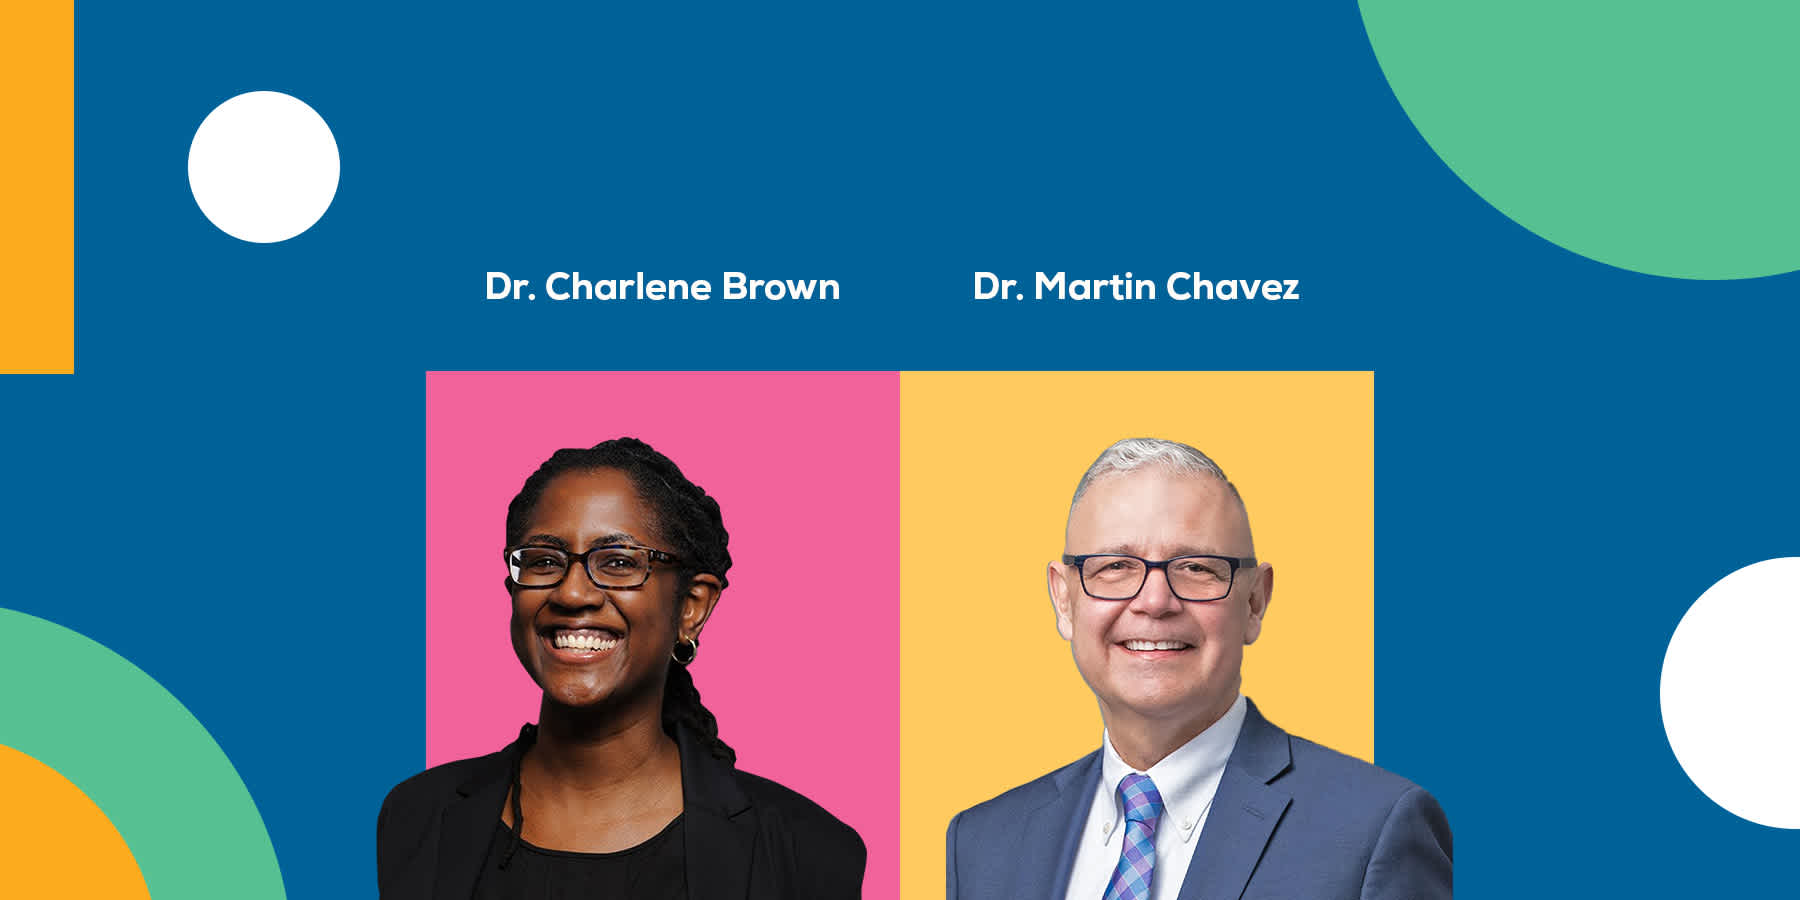 Headshots of Dr. Charlene Brown and Dr. Martin Chavez